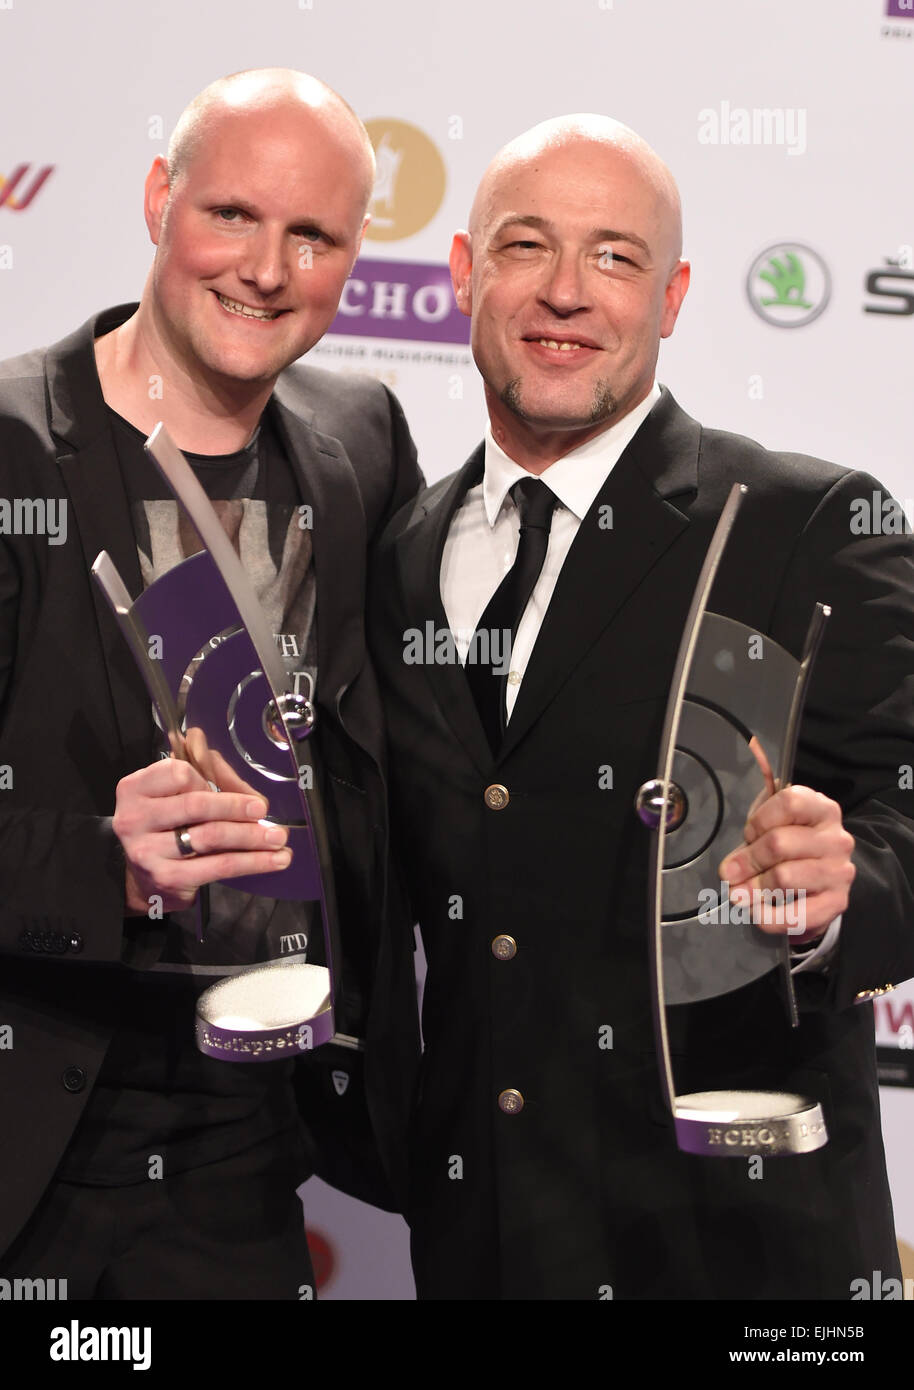 Berlin, Germany. 26th Mar, 2015. The members of the band Unheilig with singer 'der Graf', pose with their award after the Echo Music Awards ceremony in Berlin, Germany, 26 March 2015. Unheilig were awarded in the category 'Rock alternativ national'. The awards were presented for the 24th time. Photo:Jens Kalaene/dpa/Alamy Live News Stock Photo